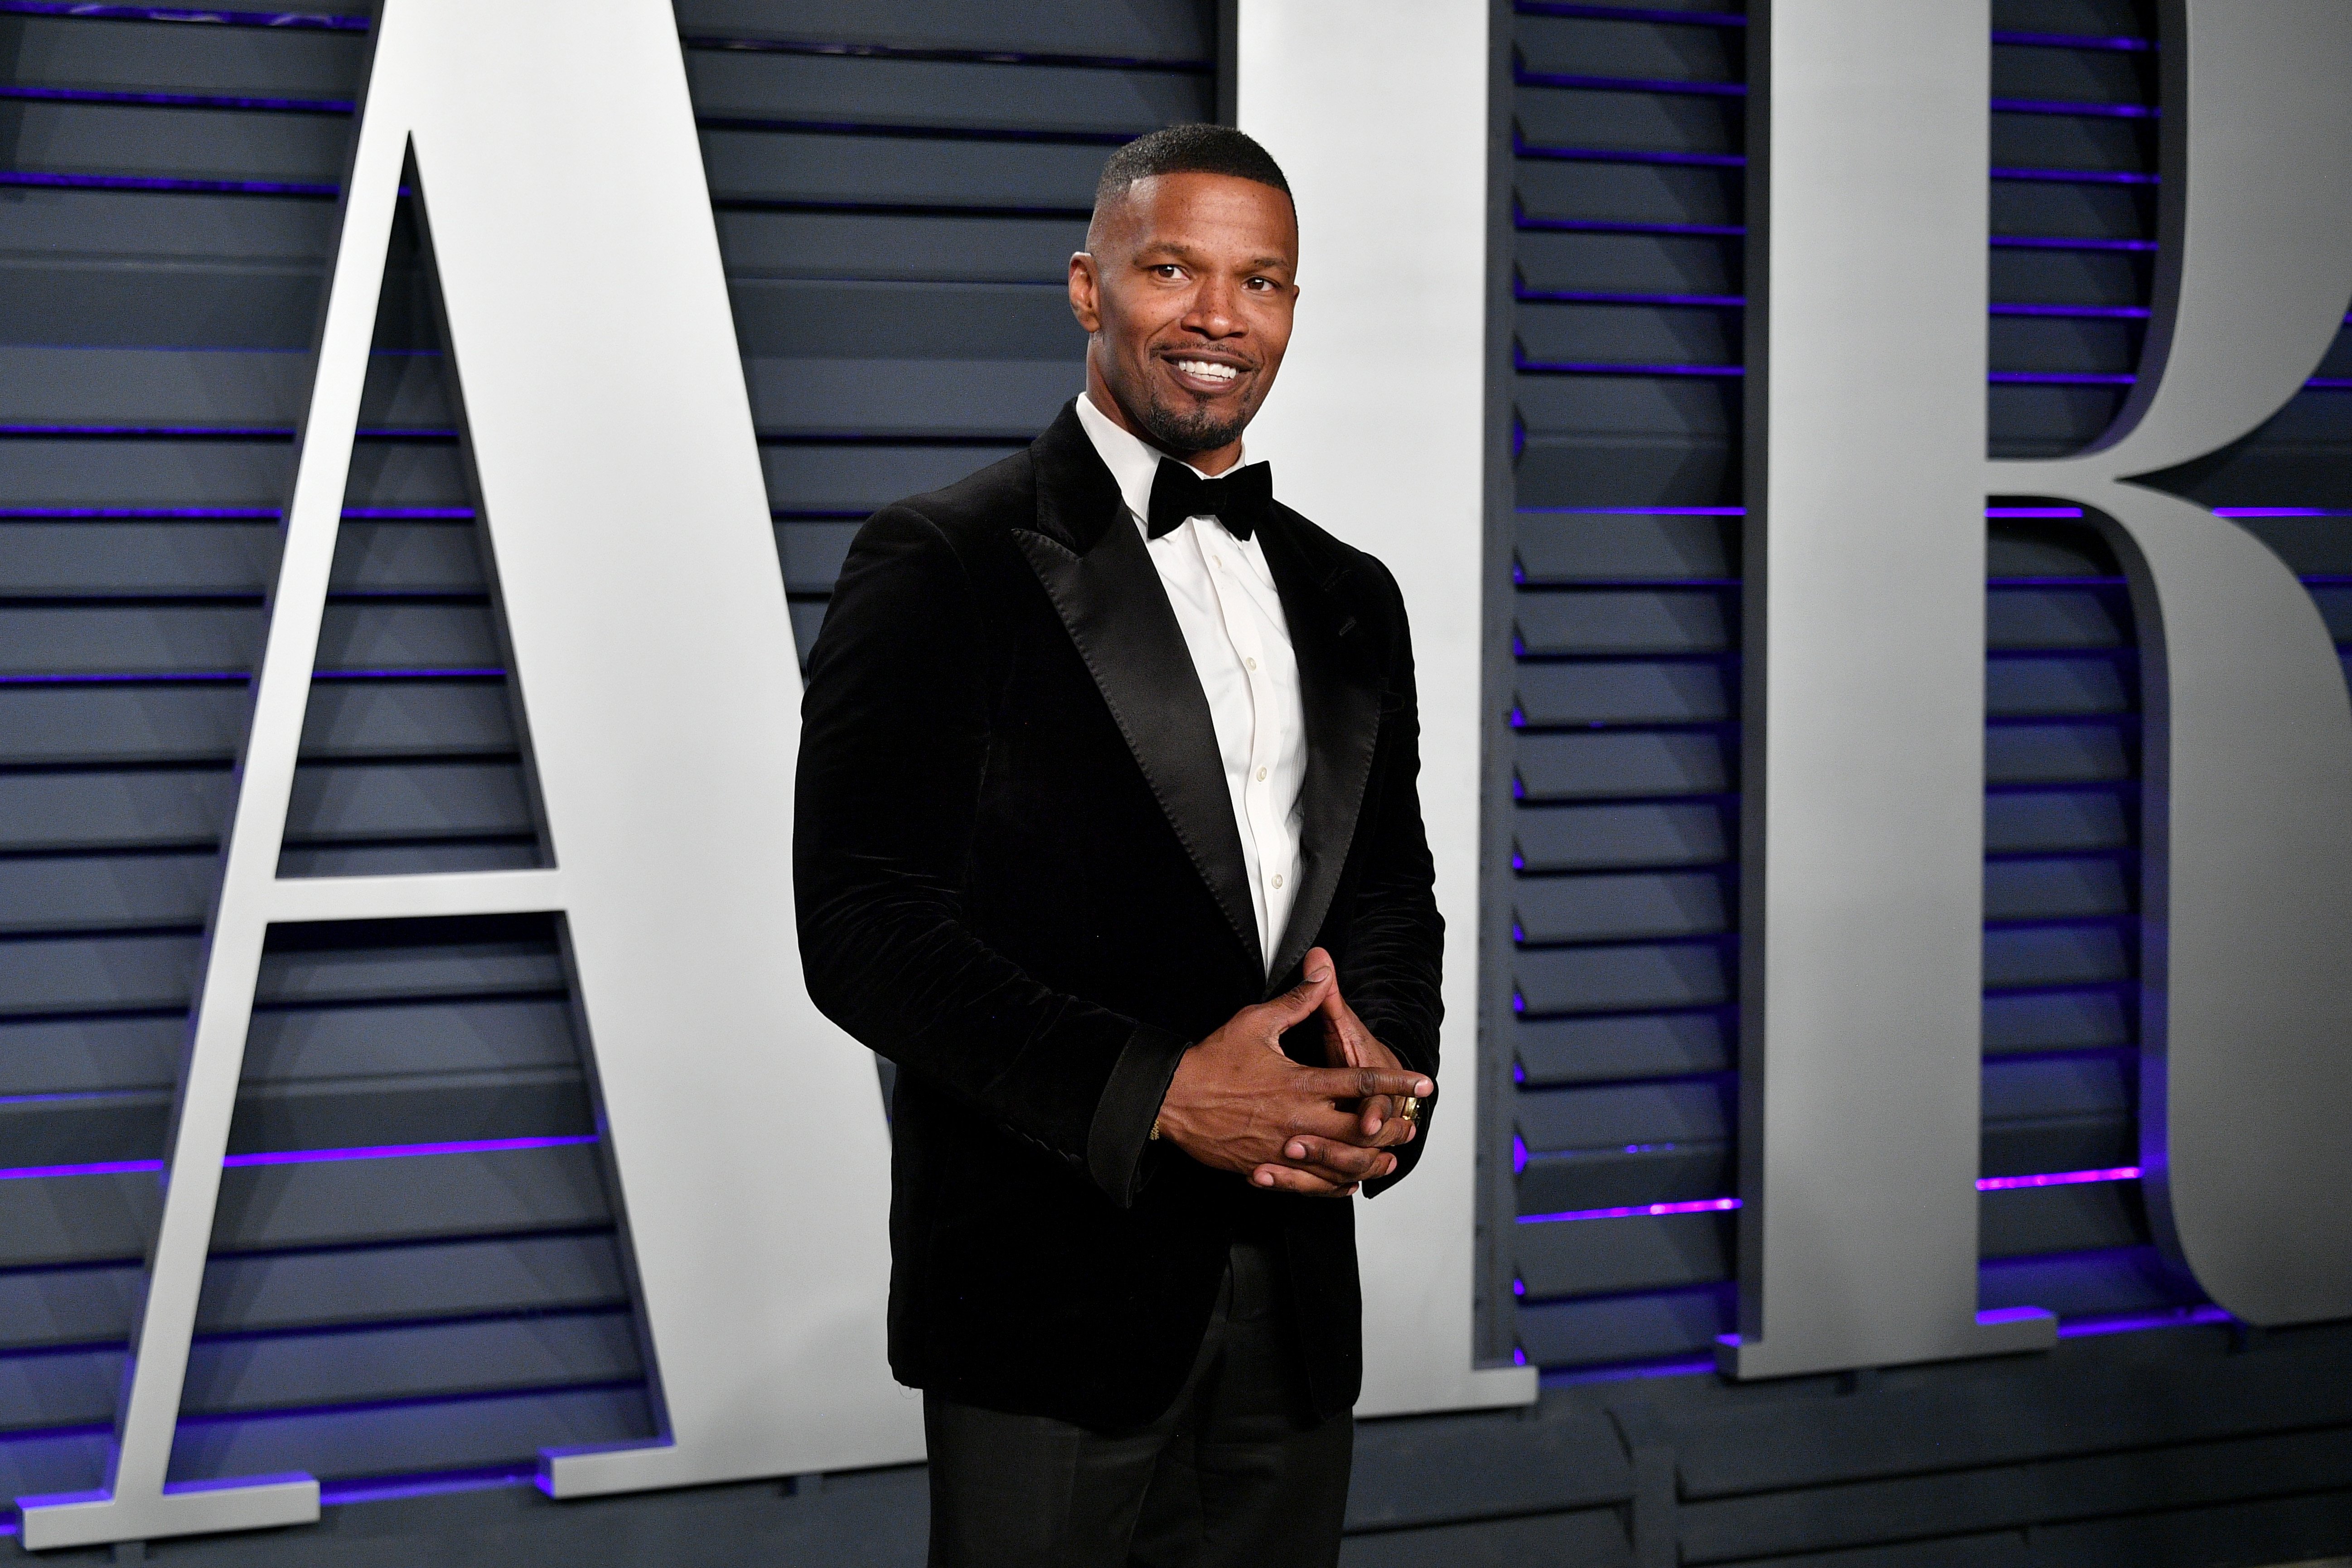 Jamie Foxx attends the 2019 Vanity Fair Oscar Party hosted by Radhika Jones at Wallis Annenberg Center for the Performing Arts on February 24, 2019 in Beverly Hills, California. | Photo: GettyImagees